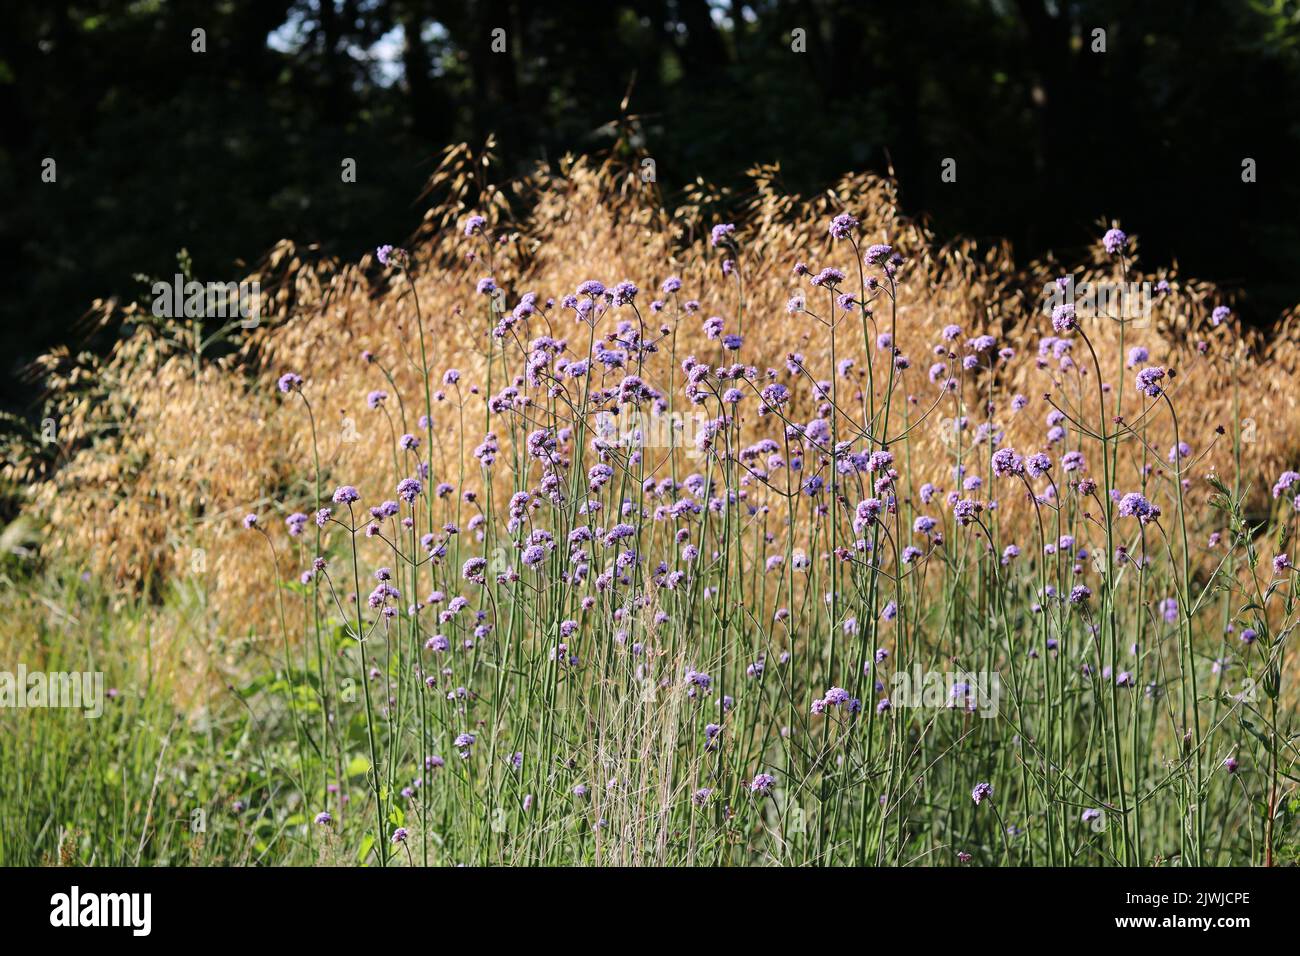 Ornamental grass with pale purple verbena bonariensis in the foreground Stock Photo